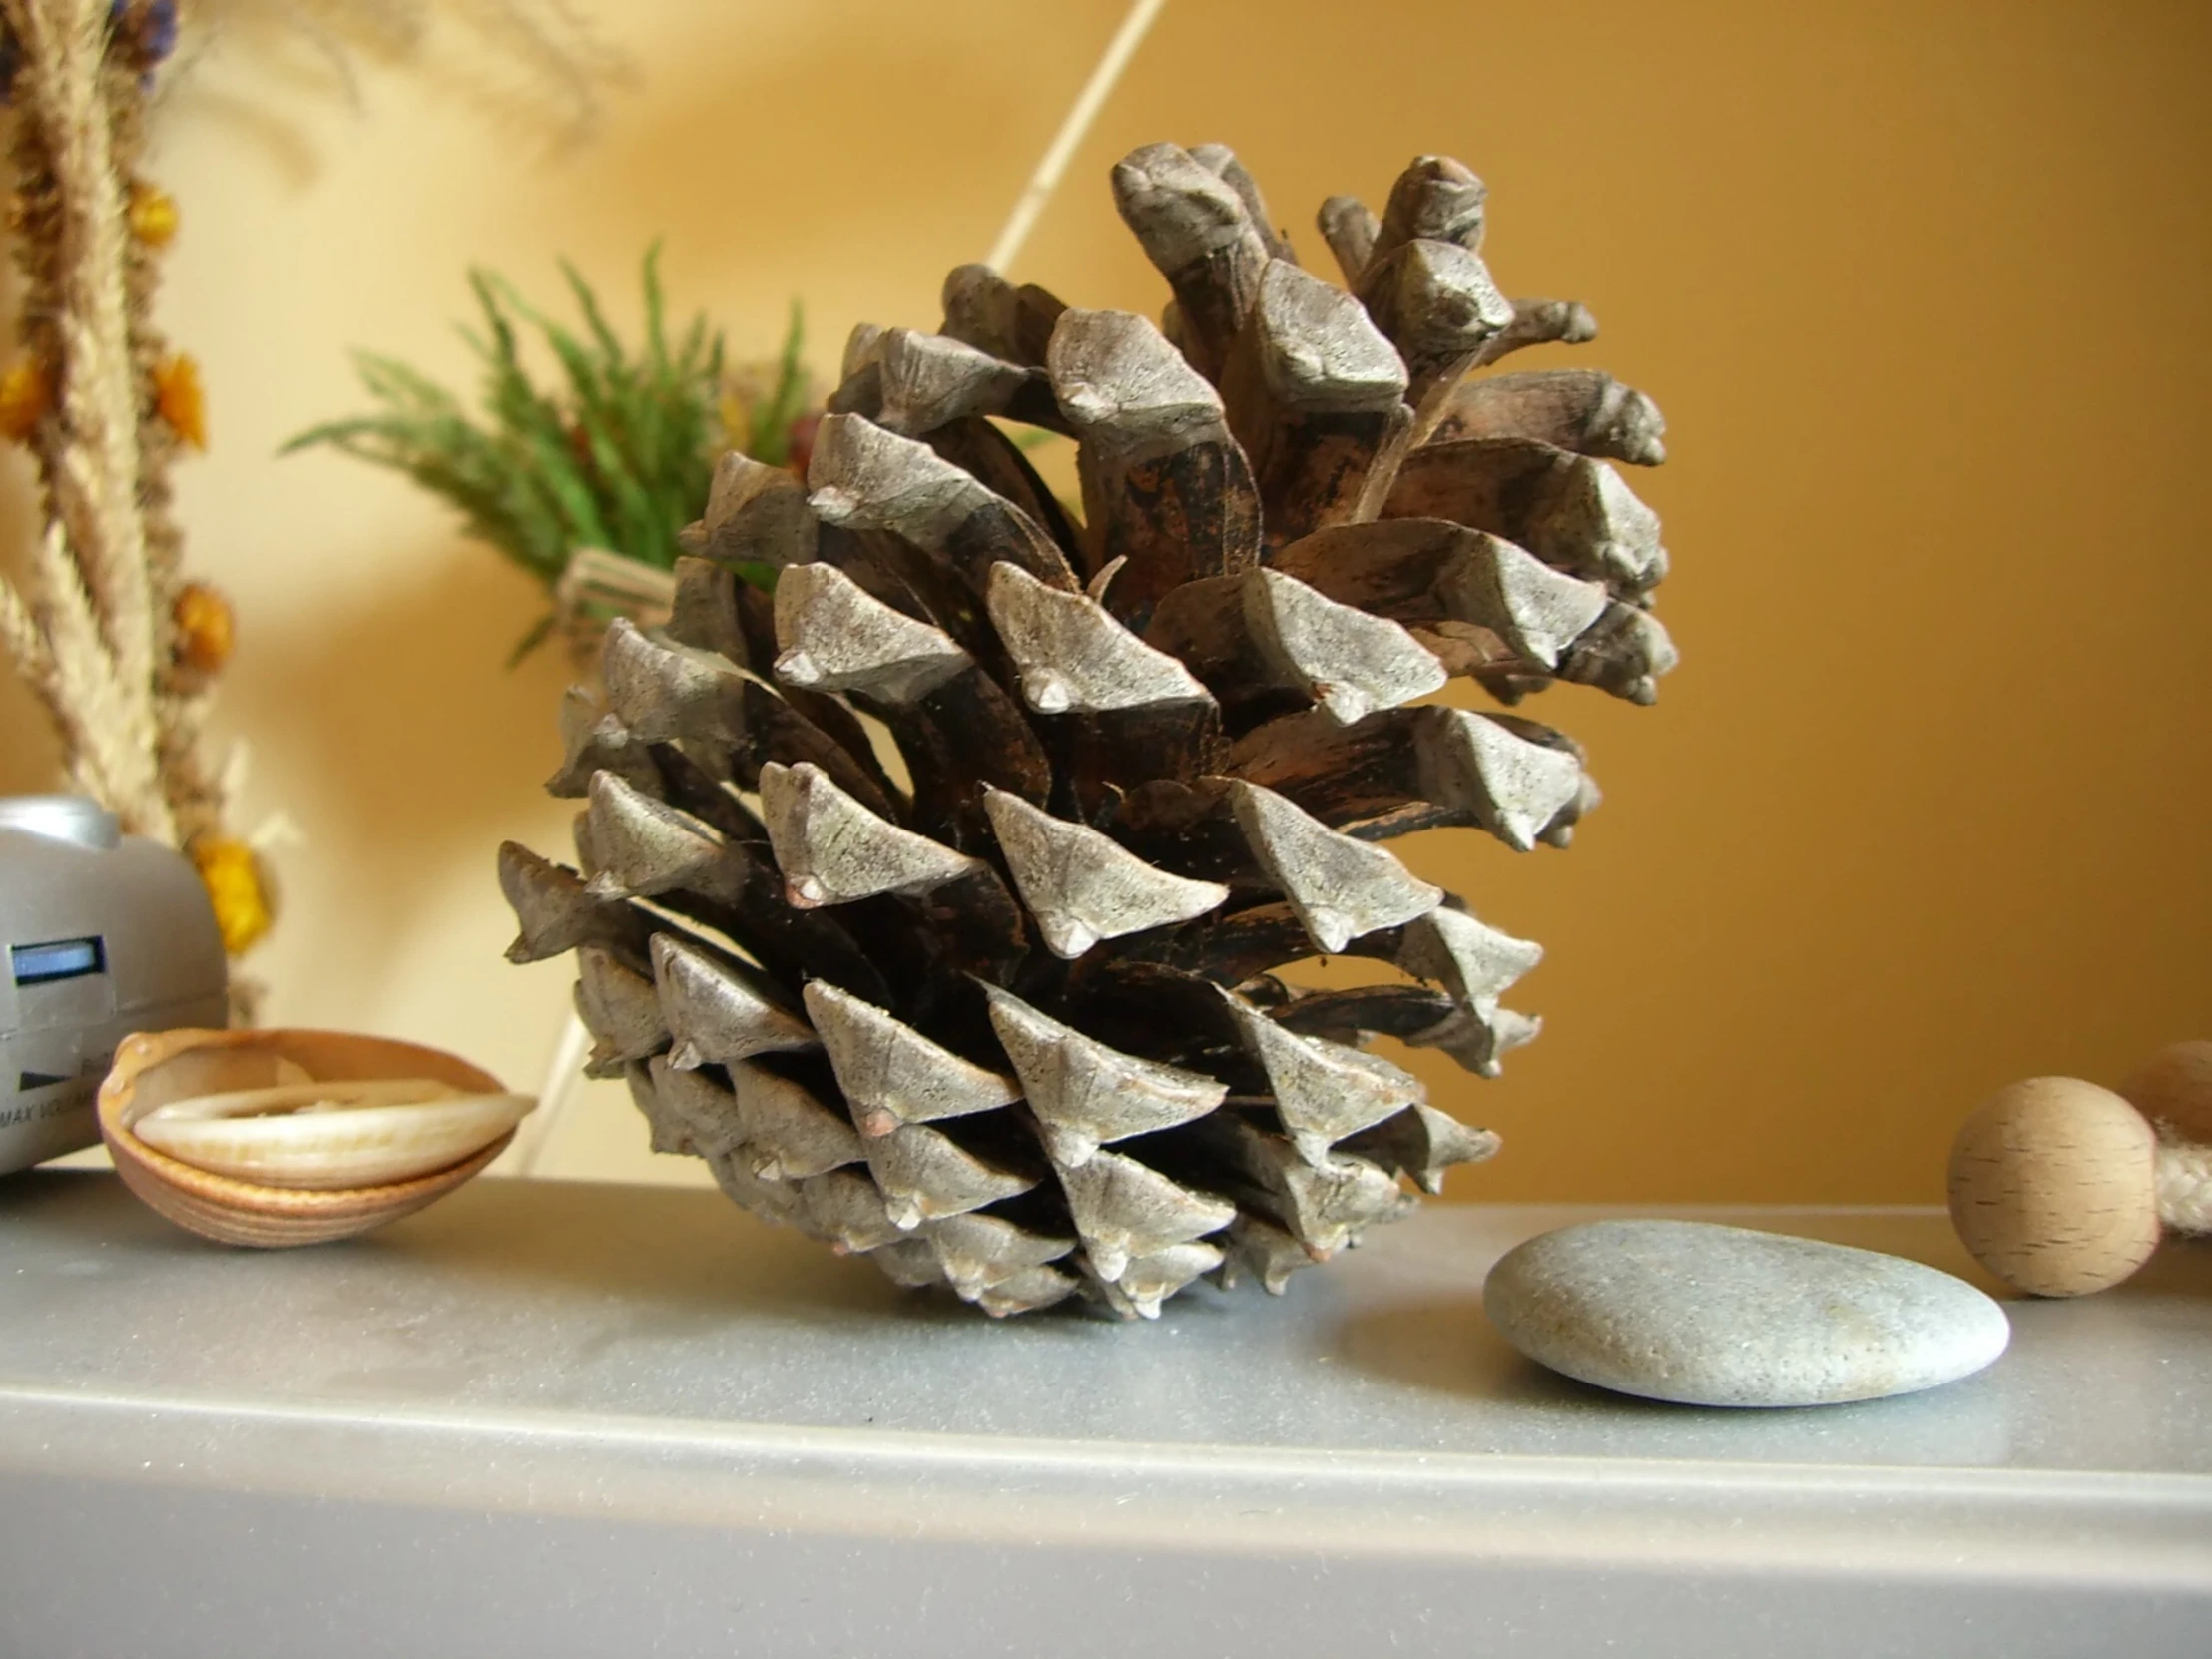 a pine cone and rocks are sitting on the table